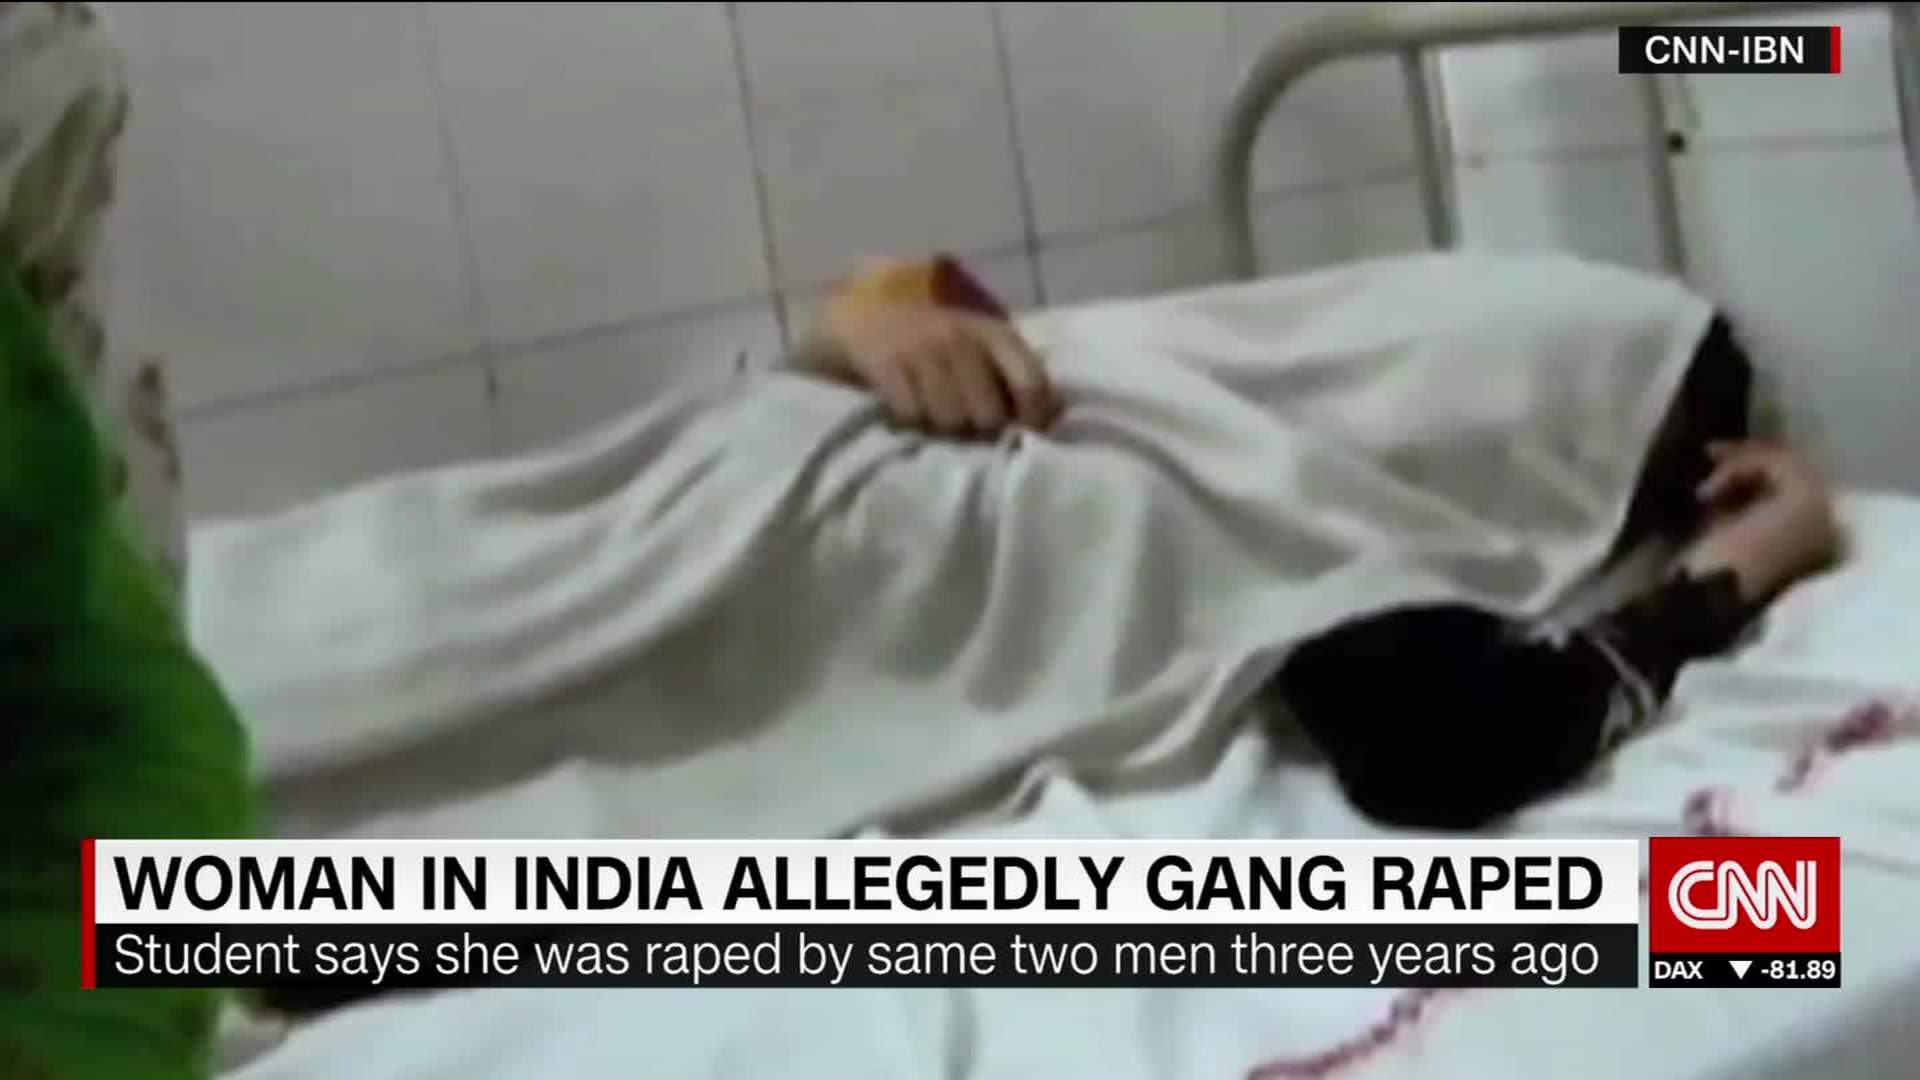 Student says she was gang raped twice by same men | CNN